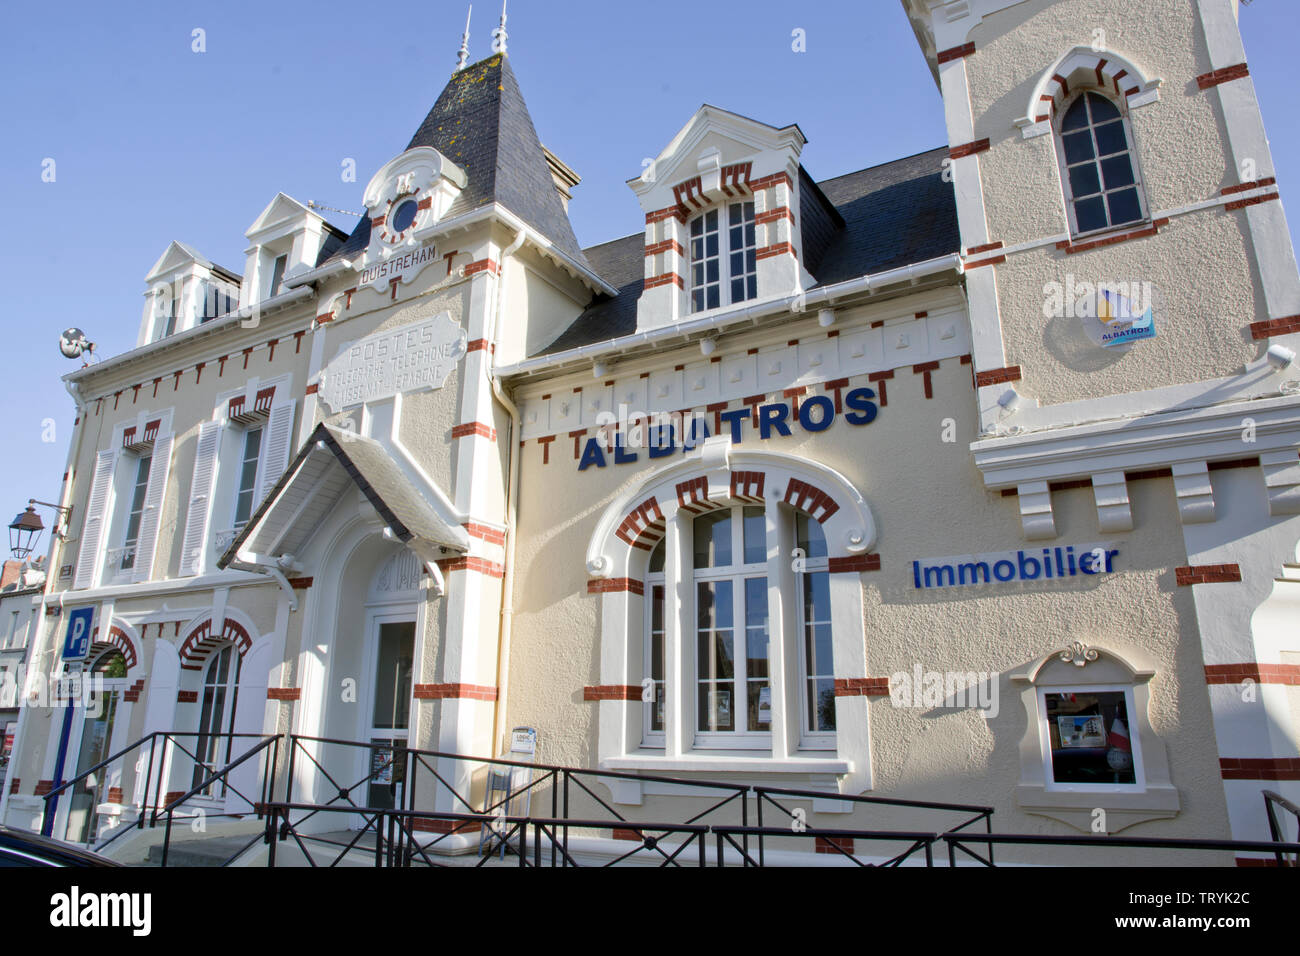 The old Post Office Ouistreham, Normandy, France Stock Photo